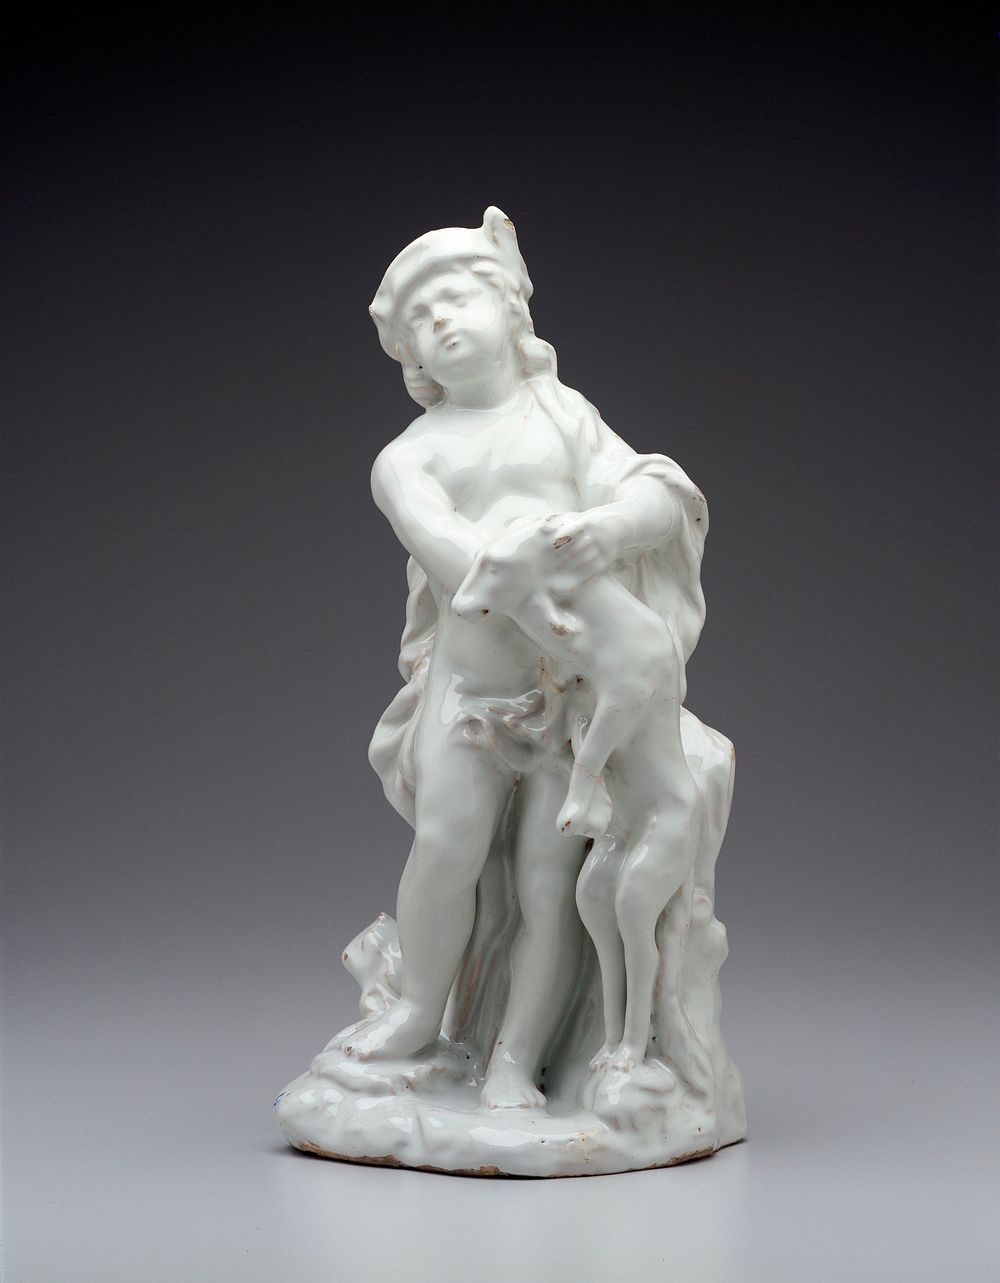 faience figure of a nude youth wearing a rustic hat, holding a standing dog by its neck; covered by a viscous white glaze.…